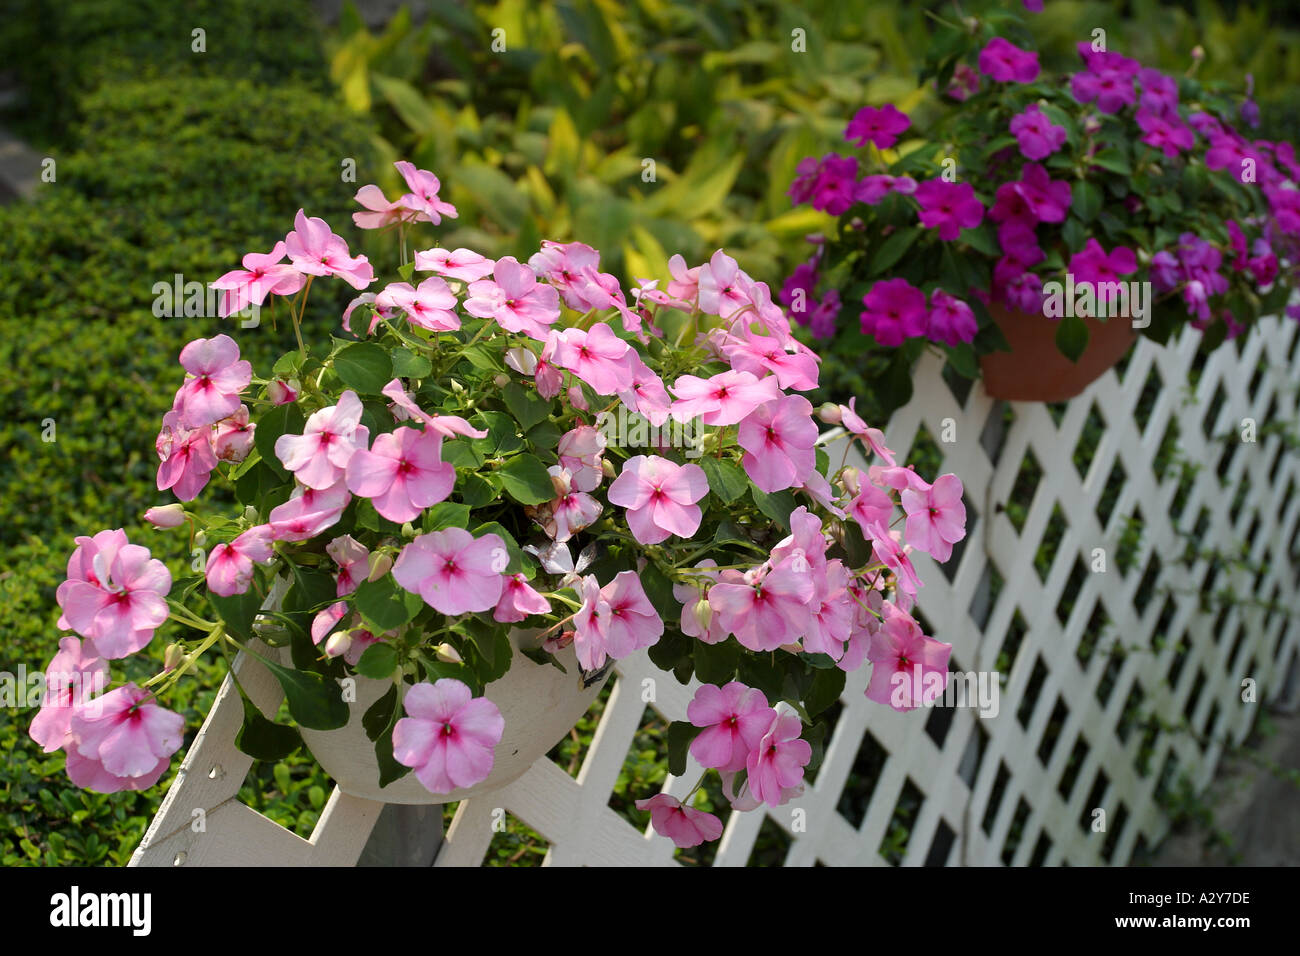 flowering shrubs clusters purple outdoor fence bamboo twigs hedge white red pink Stock Photo